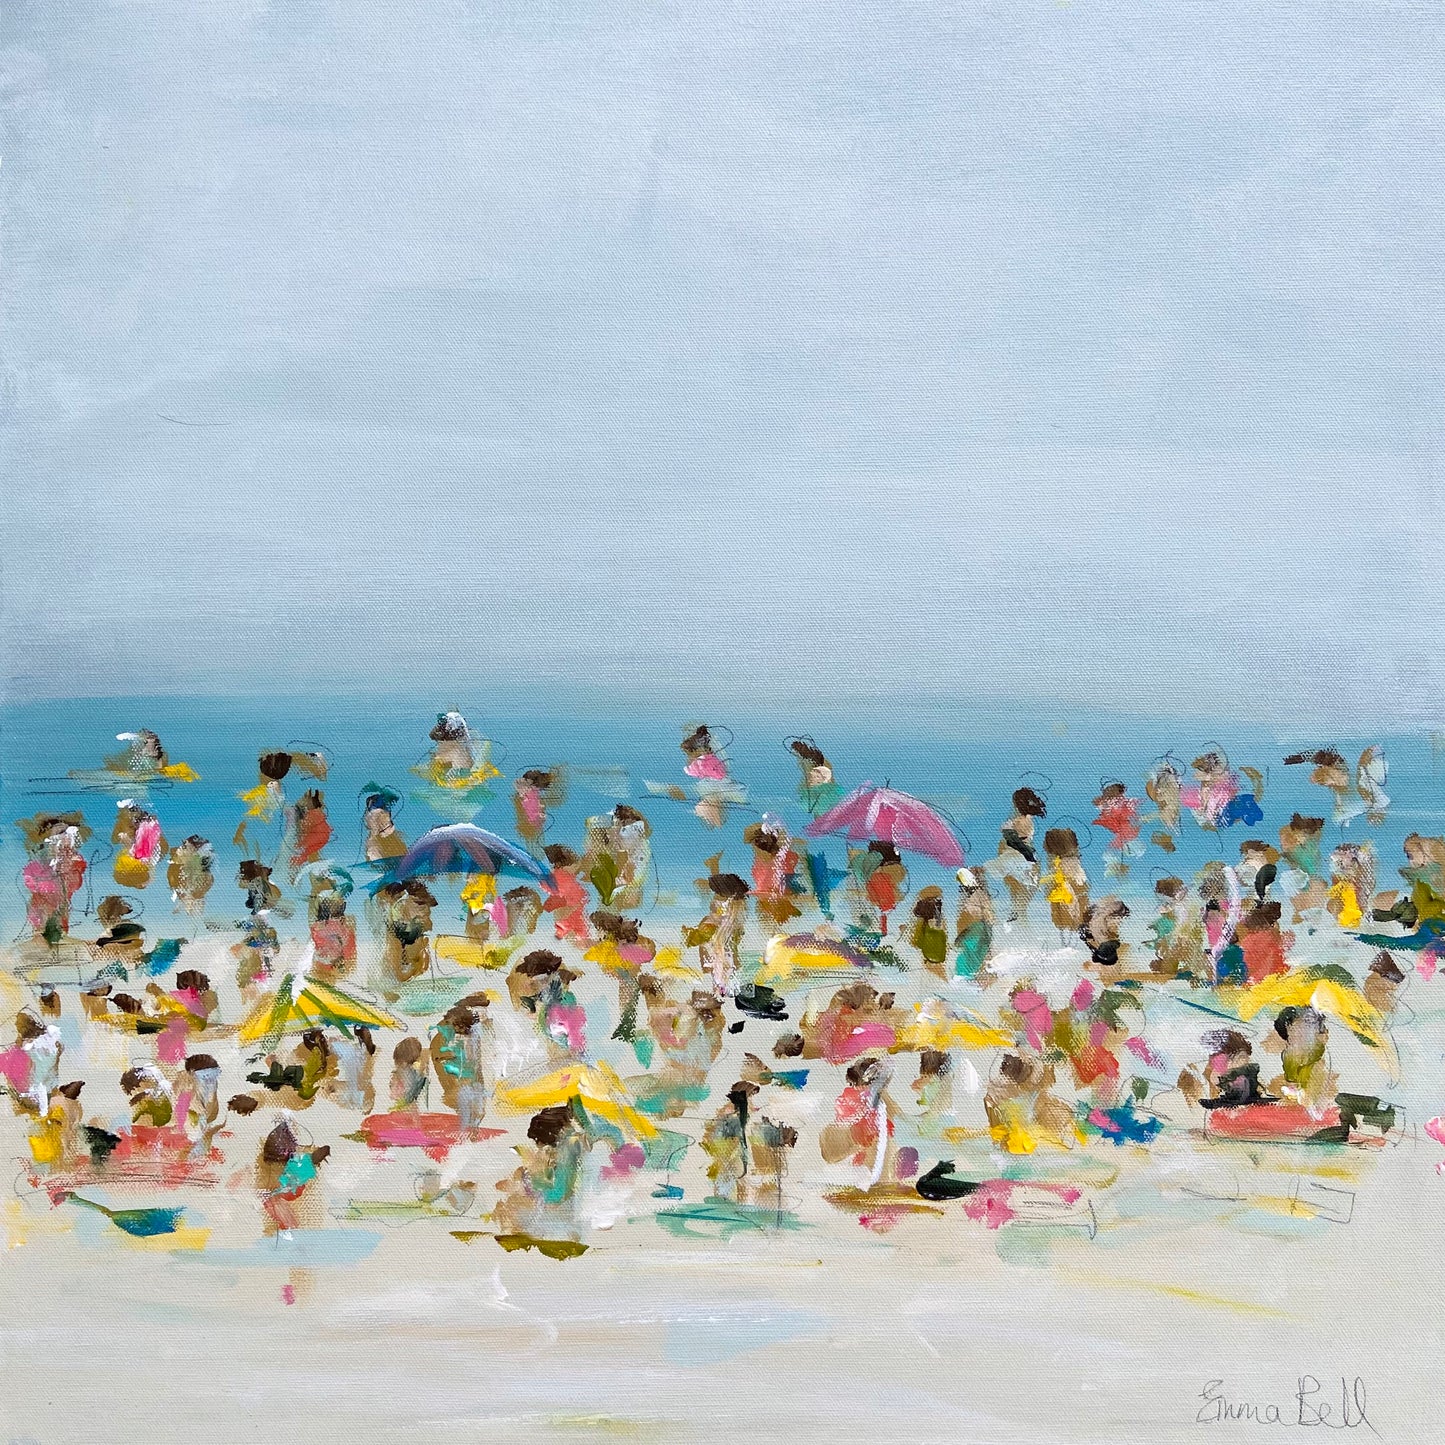 Beachlife - A Crowded Day